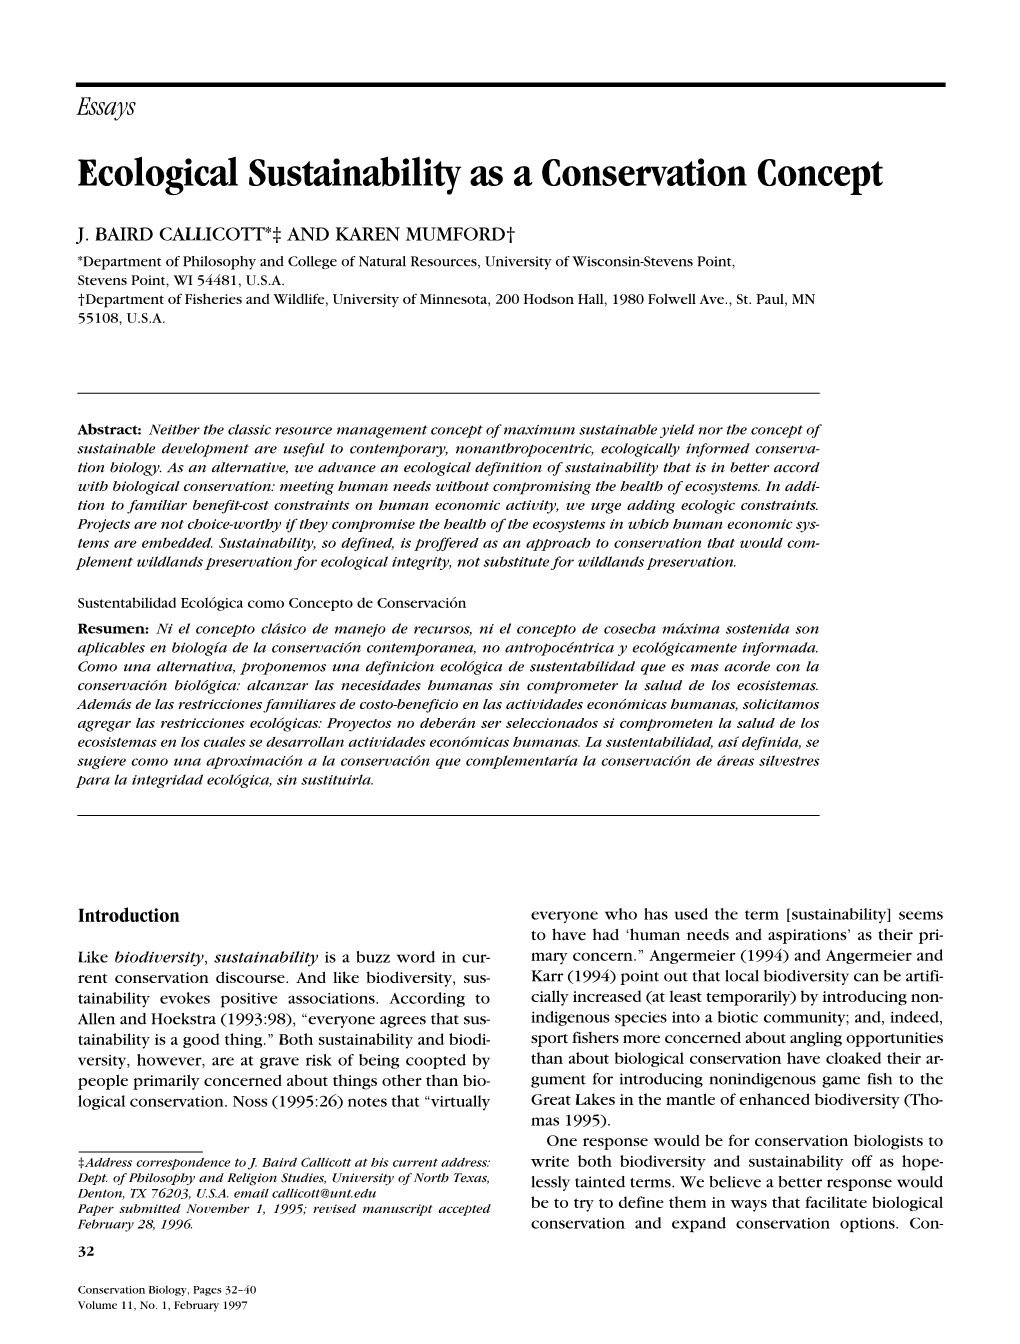 Ecological Sustainability As a Conservation Concept